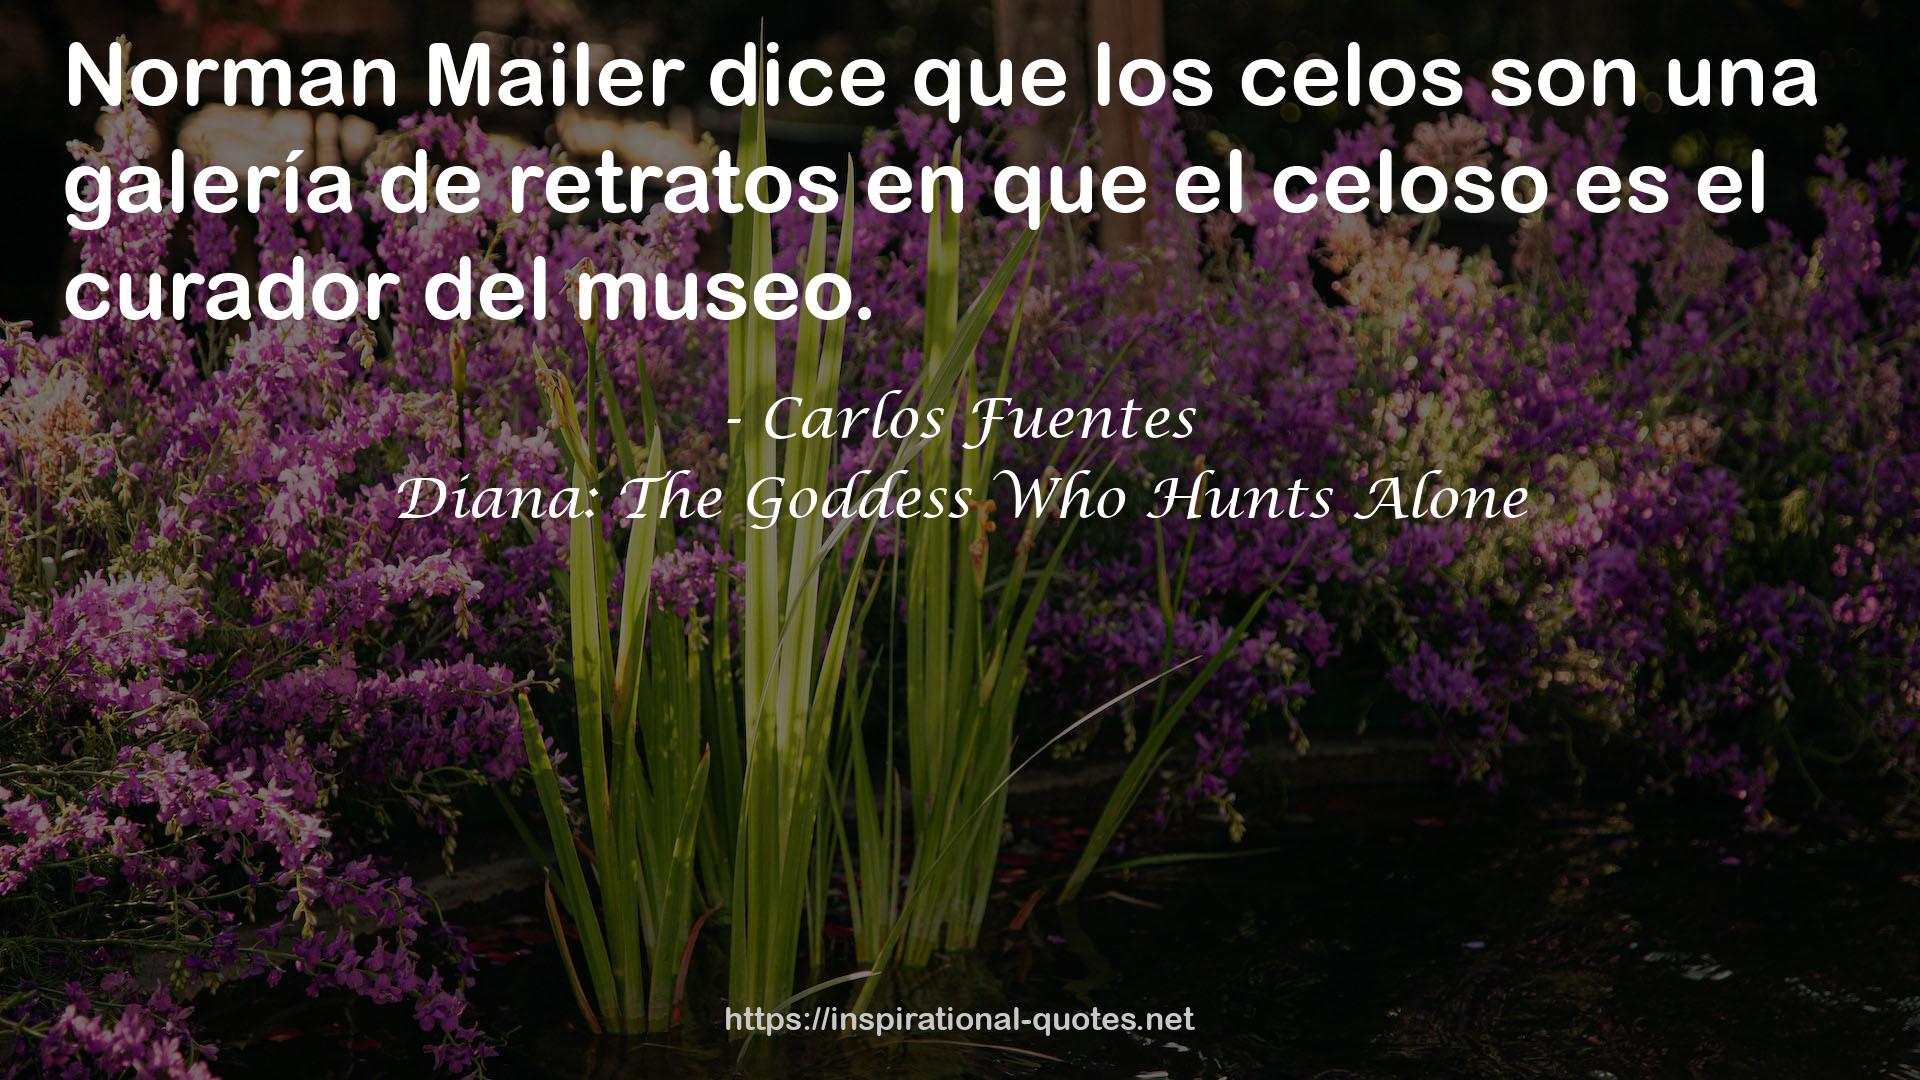 Diana: The Goddess Who Hunts Alone QUOTES